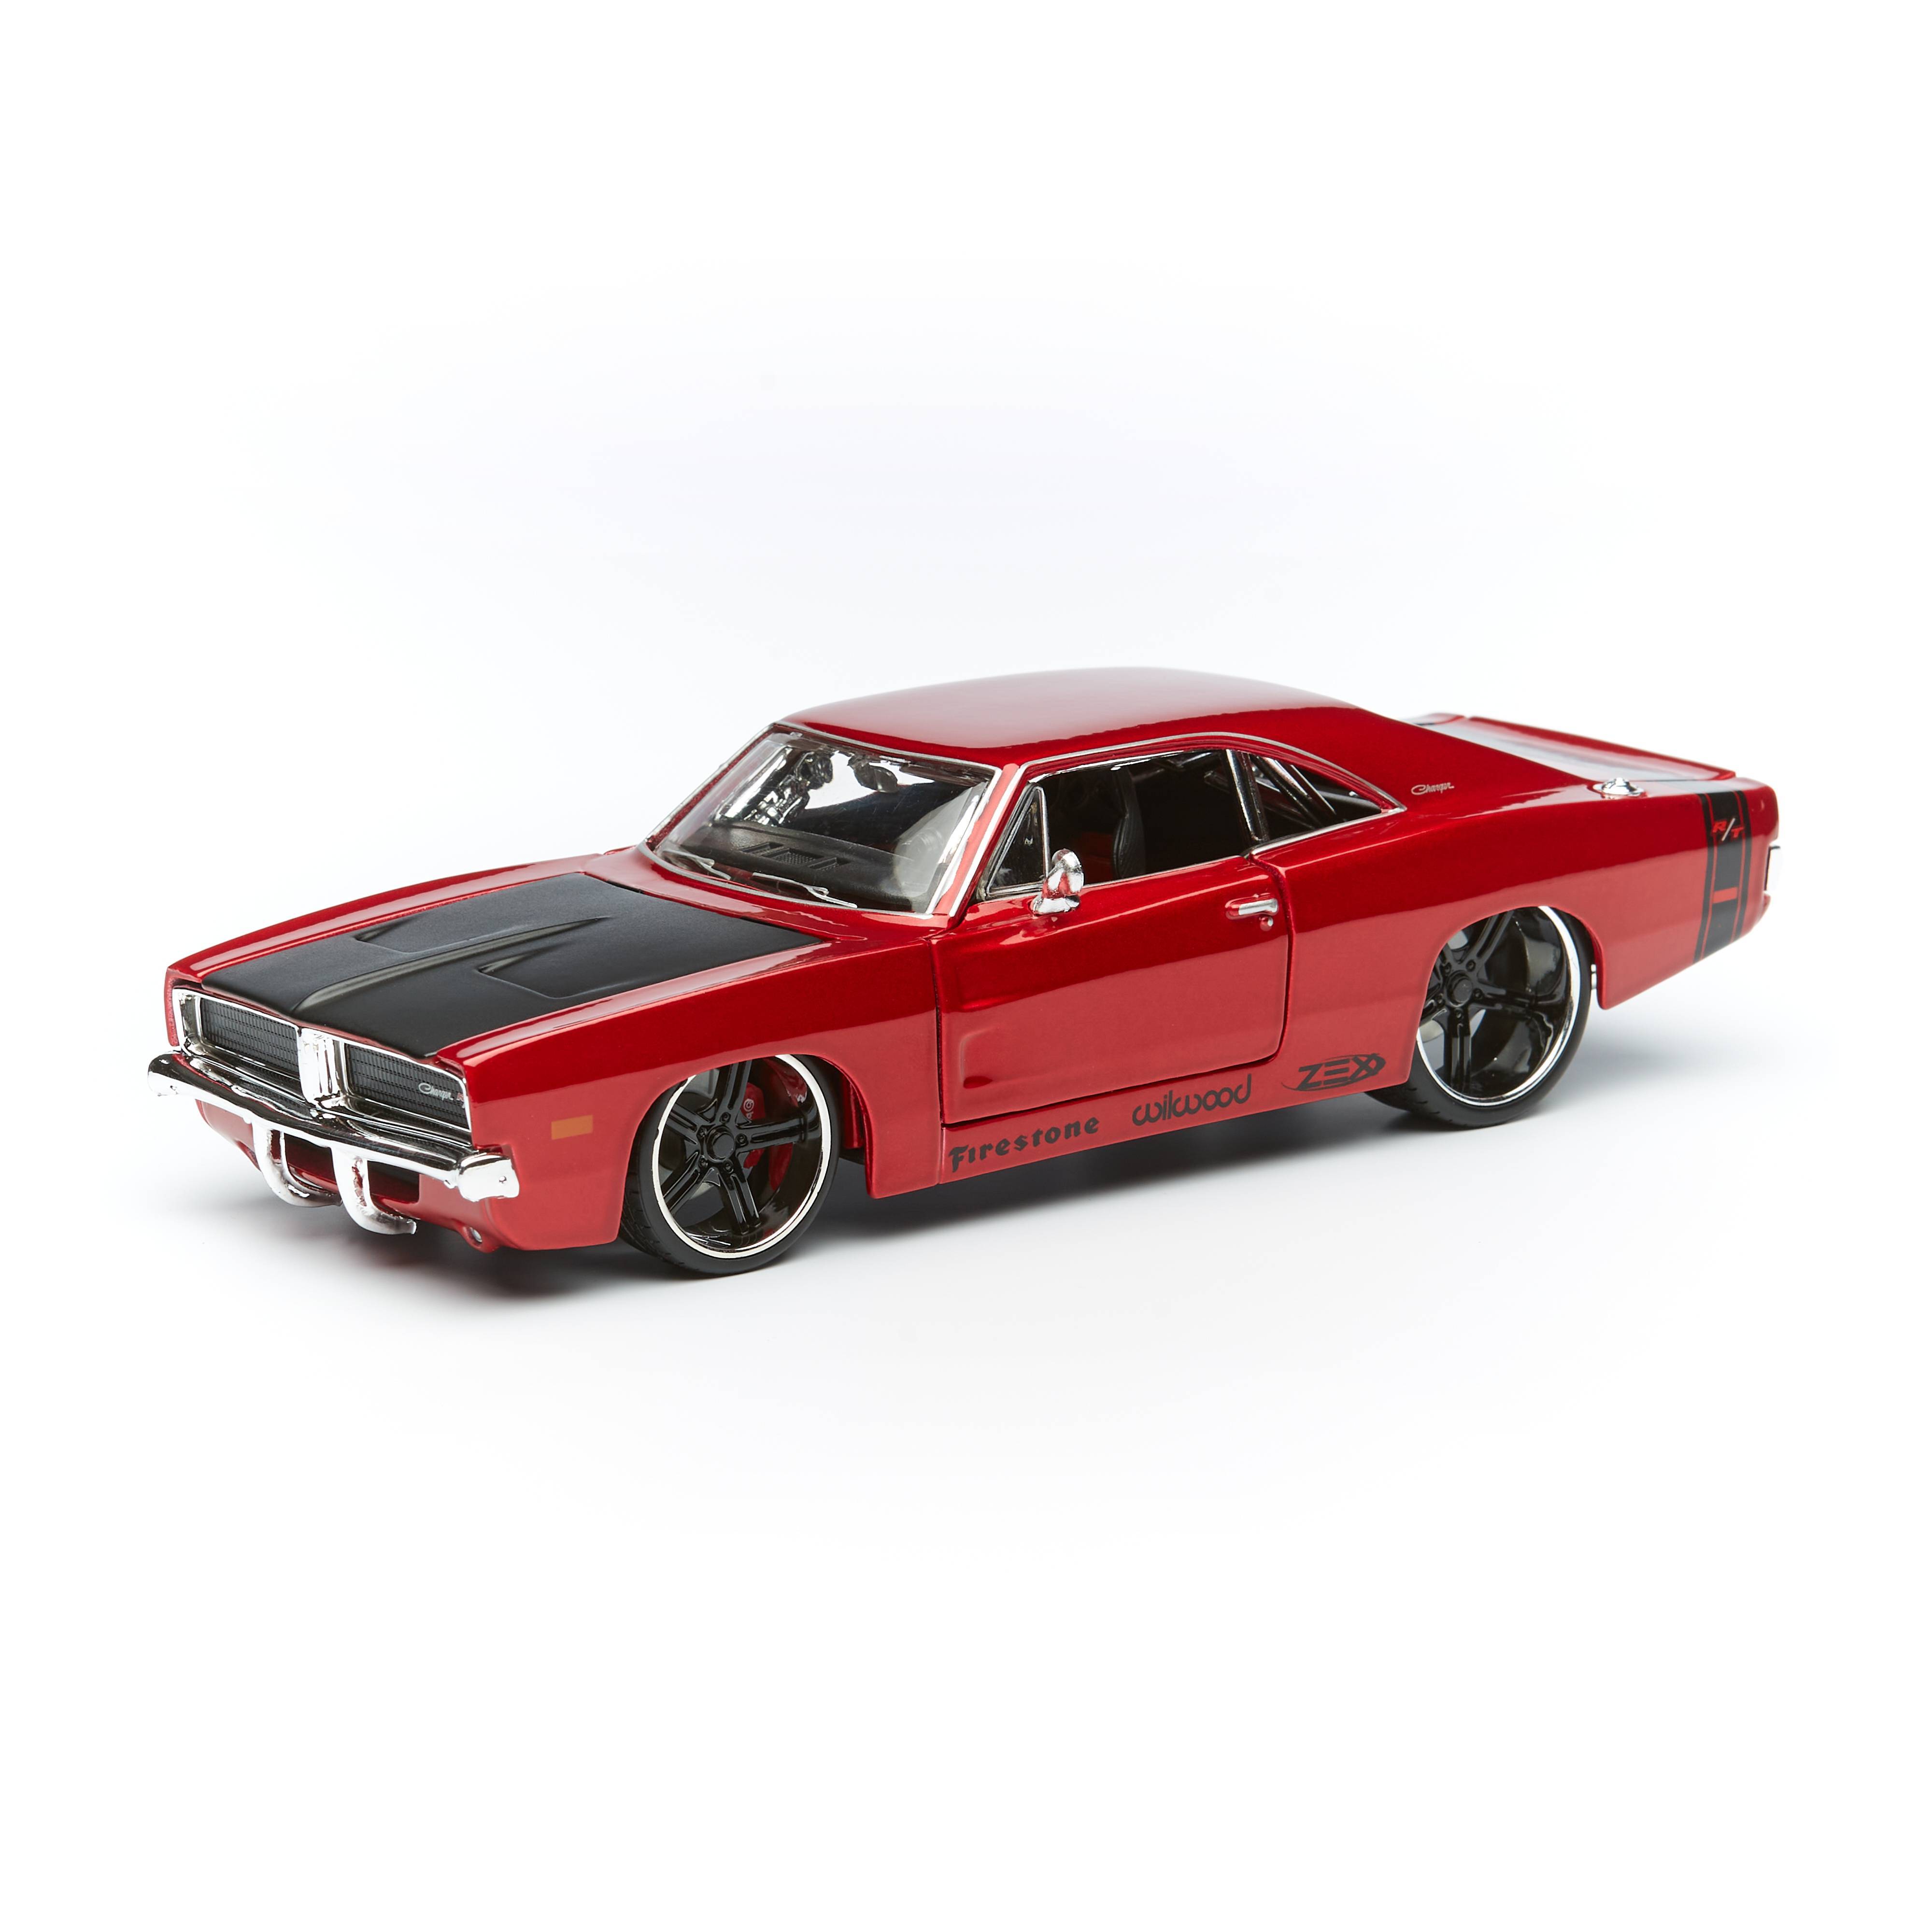 Maisto Машинка 1:25 Design Classic Muscle - 1969 Dodge Charger R/T, красная 32537 boys classic 1 24 scale 1968 chrysler dodge charger r t fitted diecasts